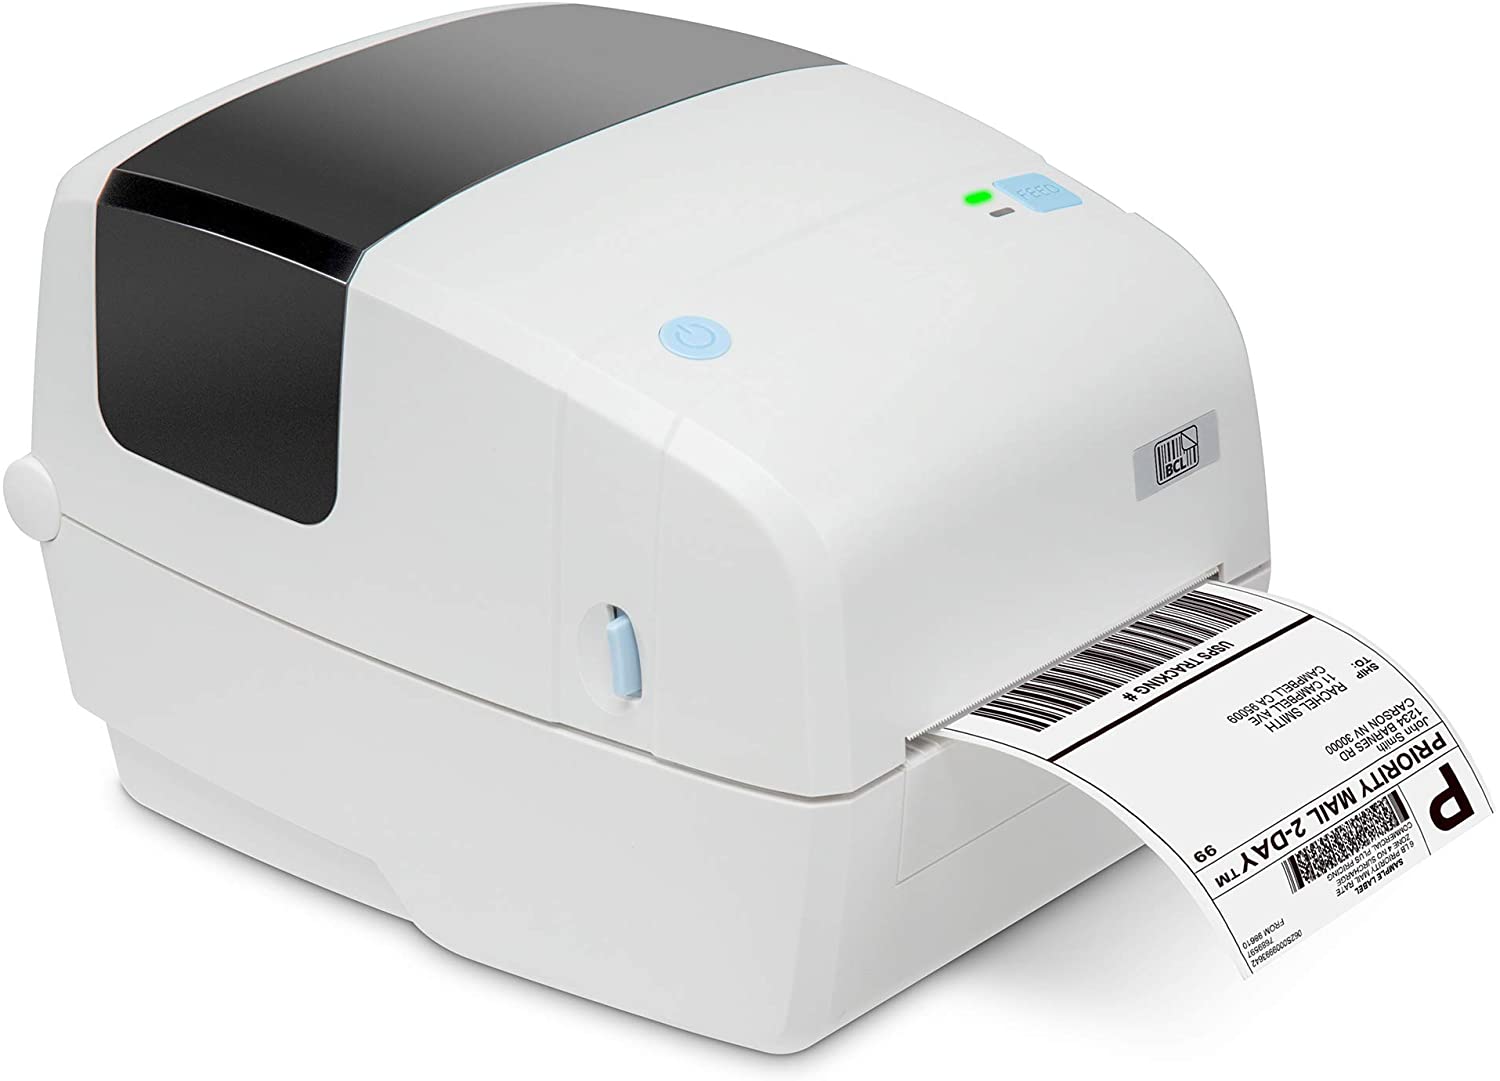 Photo 1 of BCL D110 Label Printer Ethernet  USB Port Prints 4x6 Shipping Mailing Postage Barcode  Address Labels Direct Thermal inkless Printer USB Printer Cable Included Windows  Mac Compatible